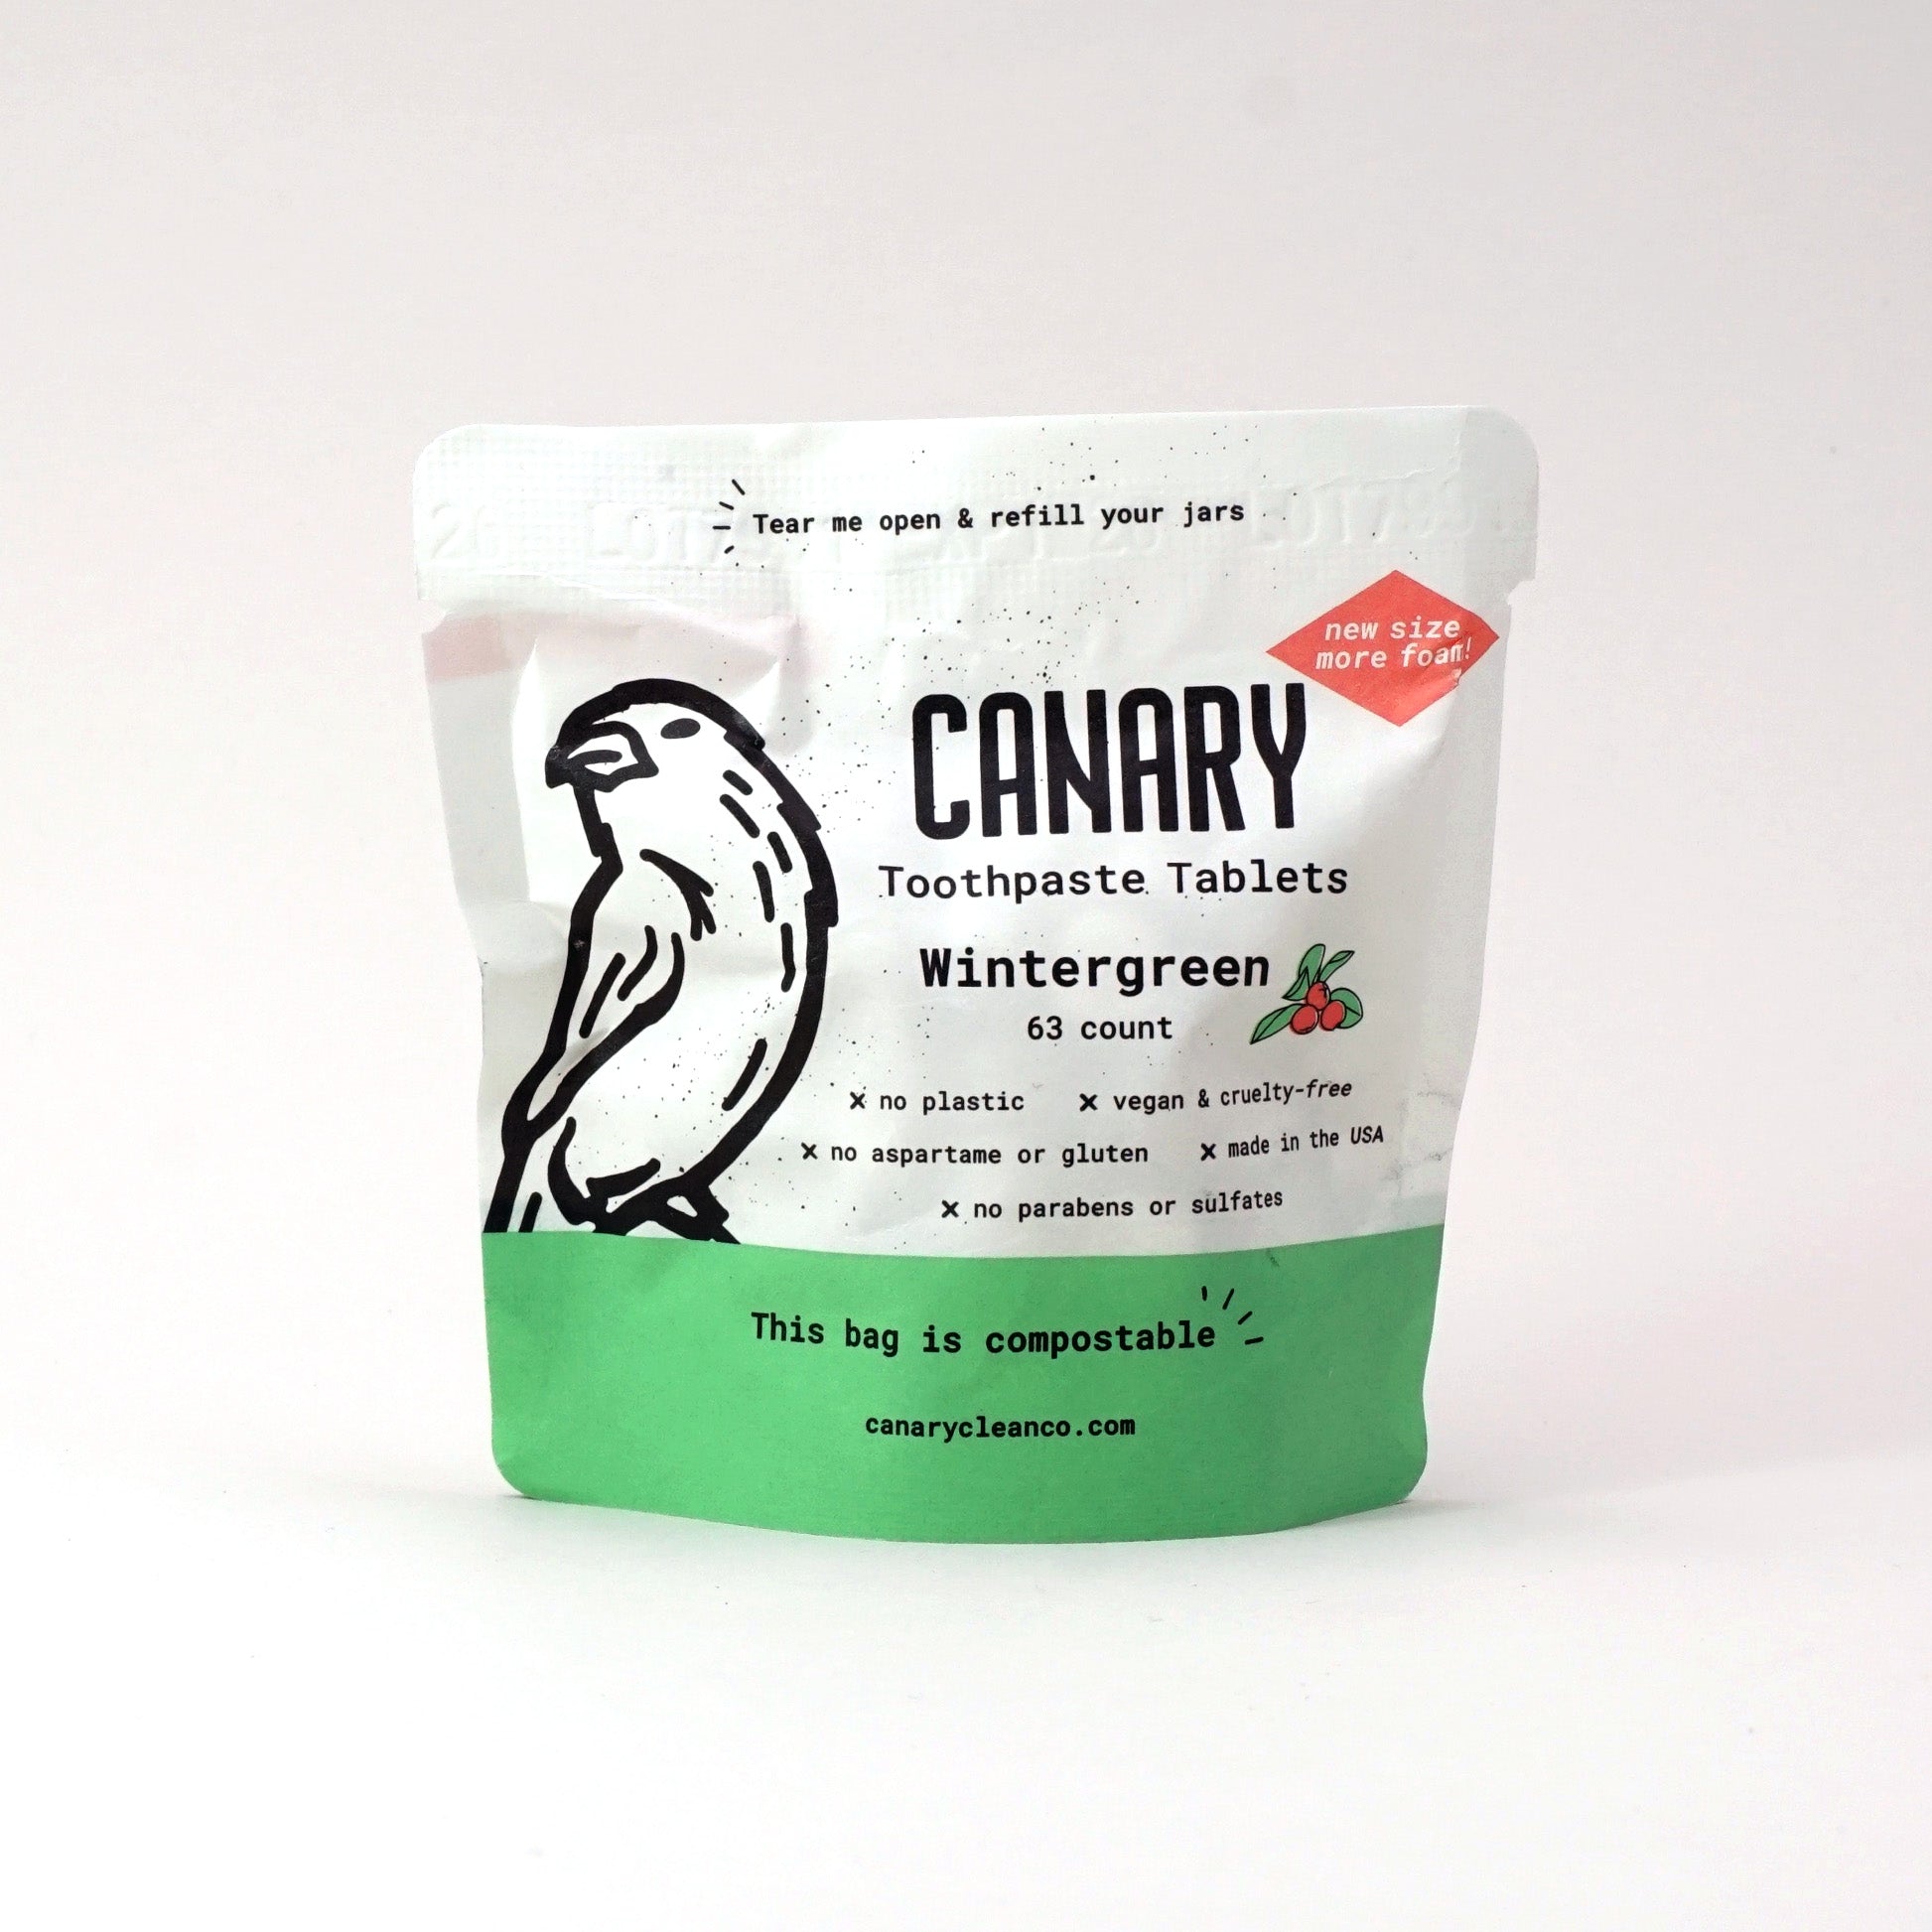 Canary Wintergreen Toothpaste Tablets, sample size 63 count compostable pouch, front view of the pouch